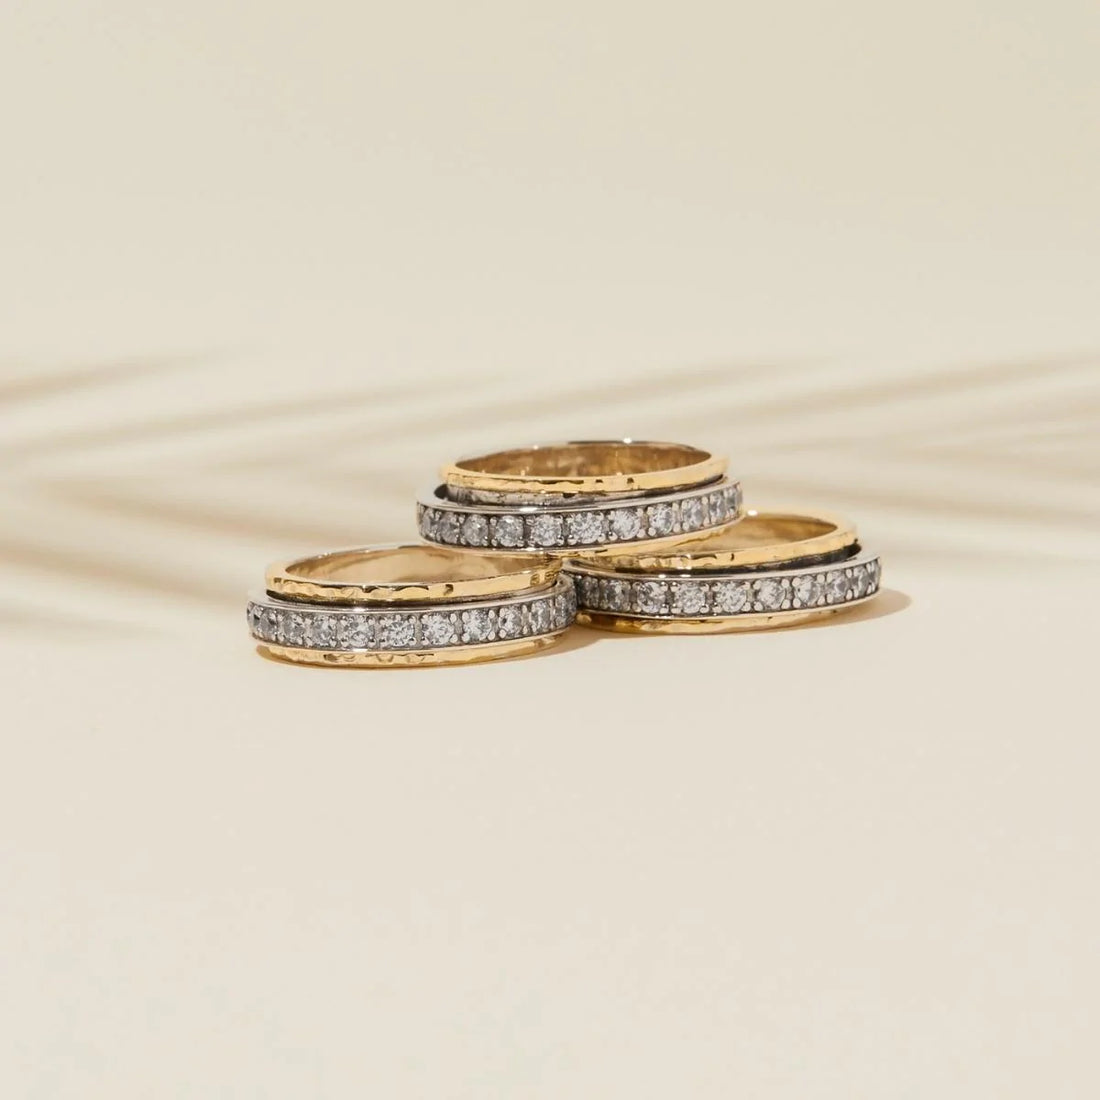 How difficult is it to resize a platinum wedding ring? - Quora